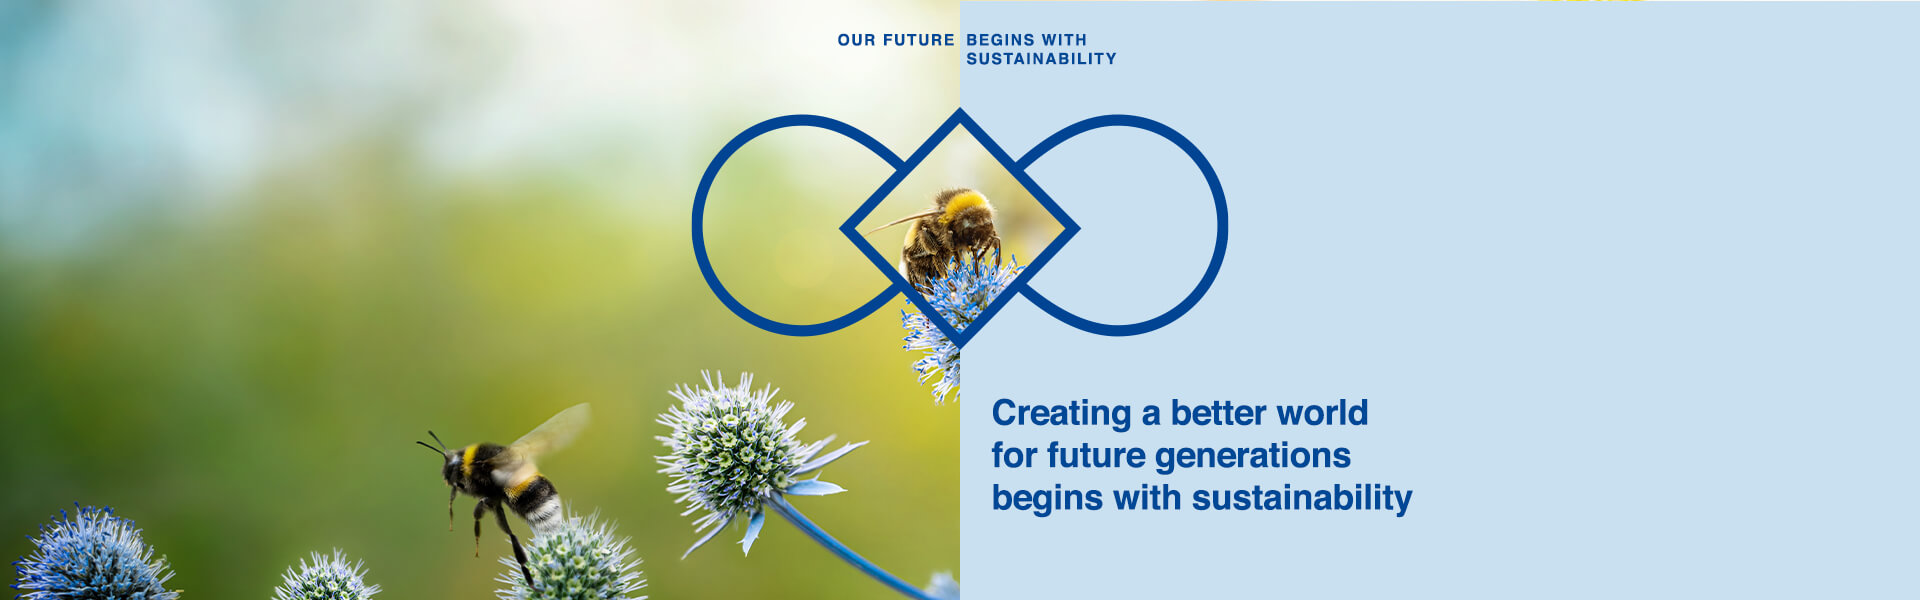 Our future begins with Sustainability 